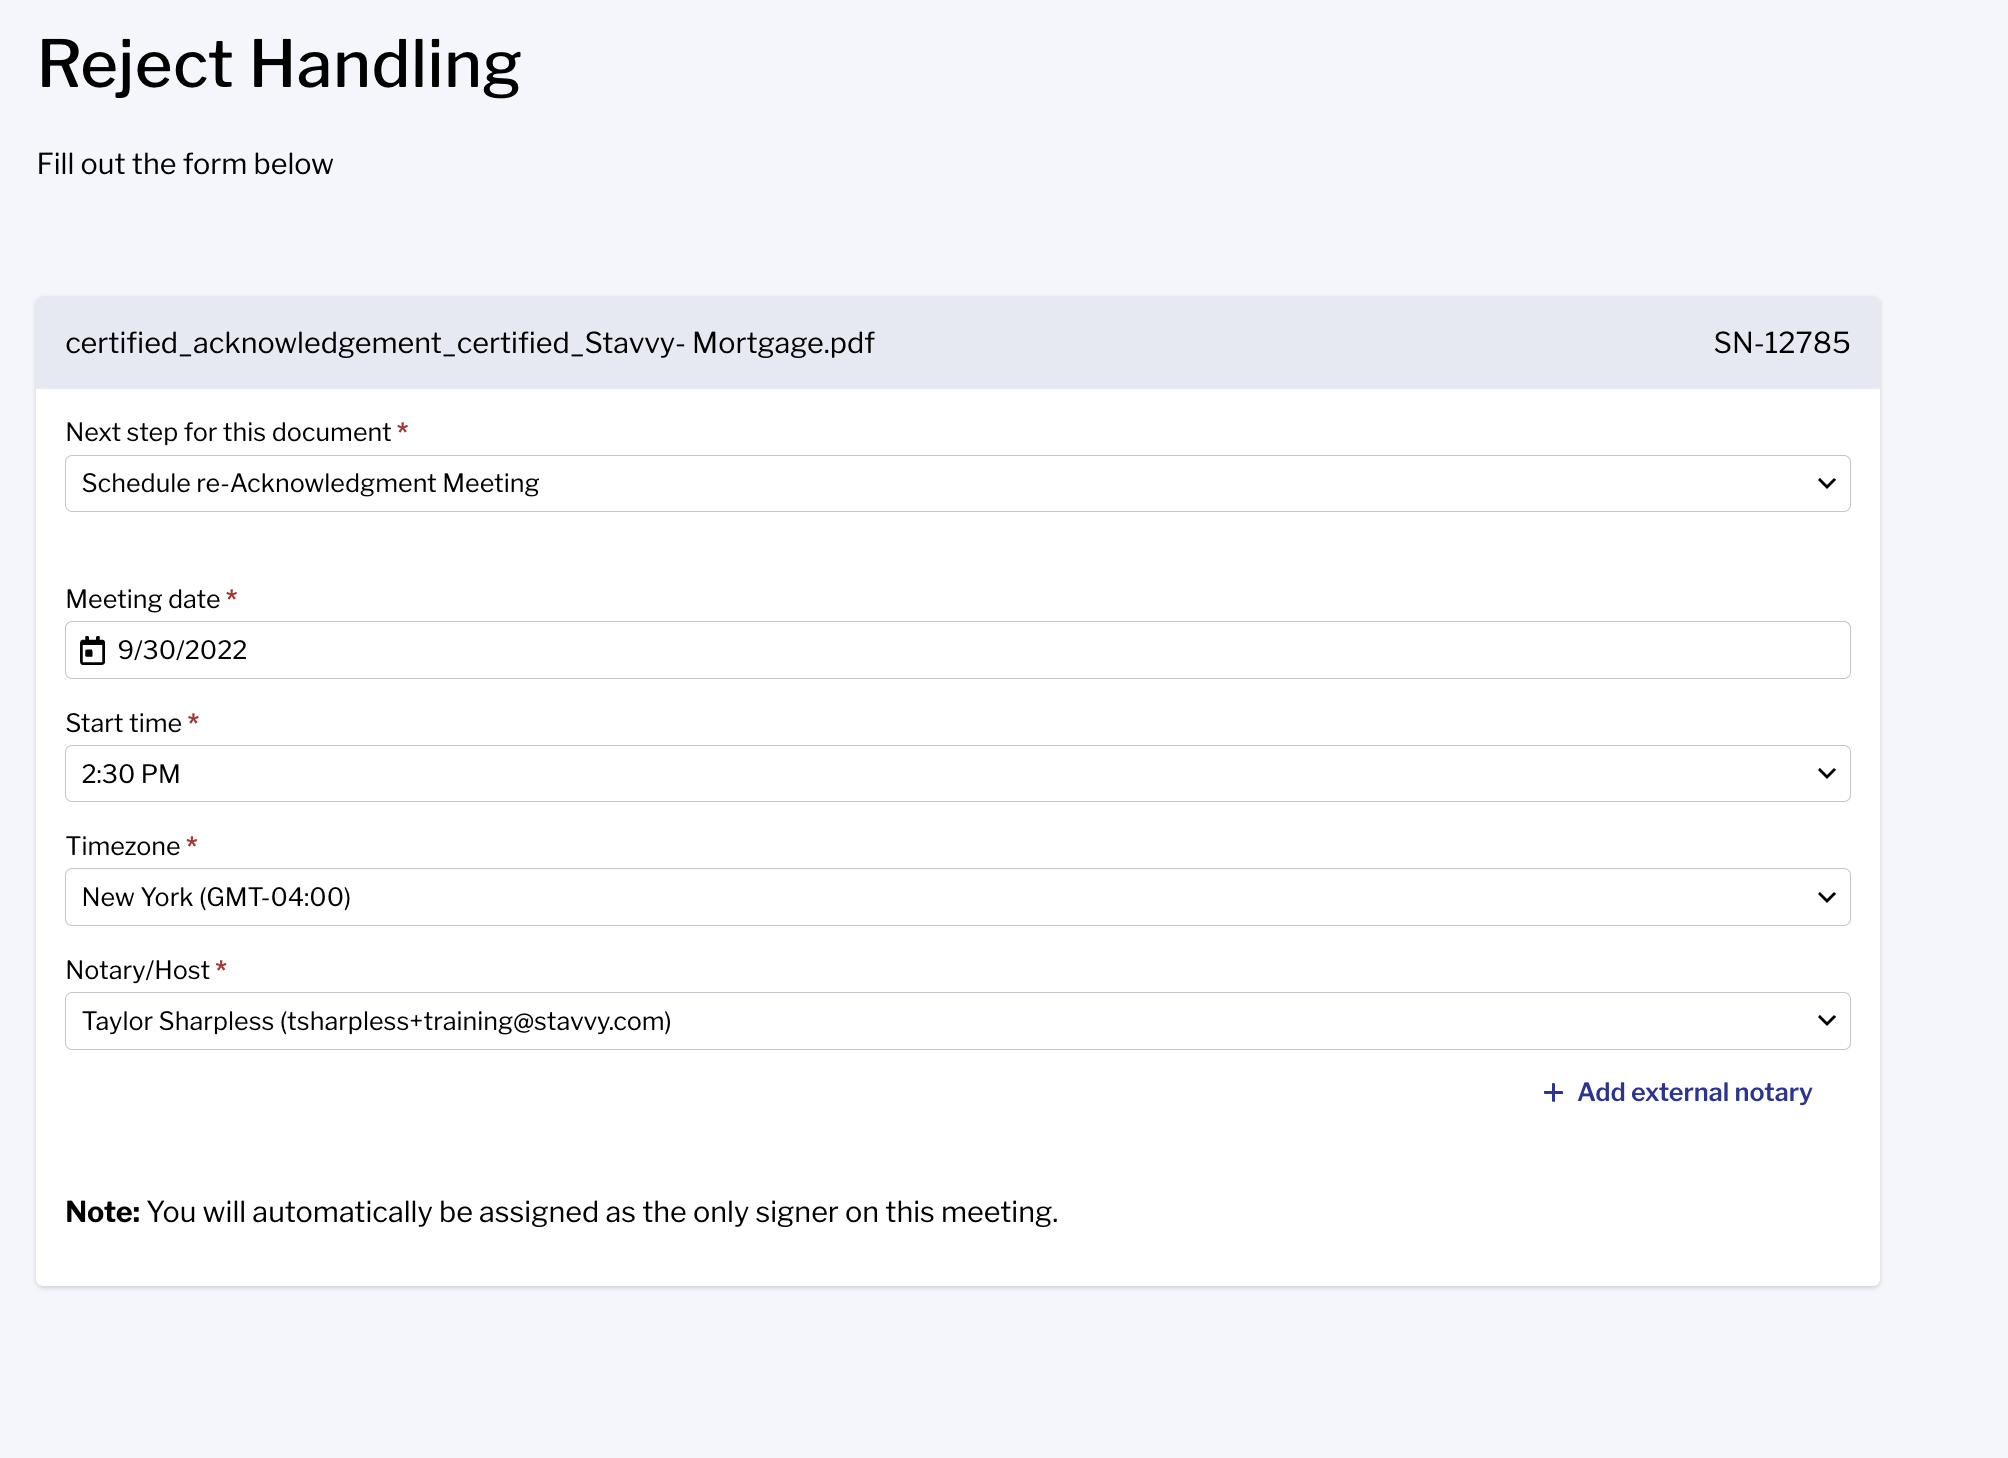 Screenshot of the Reject Handling page Next step for this document form being filled in